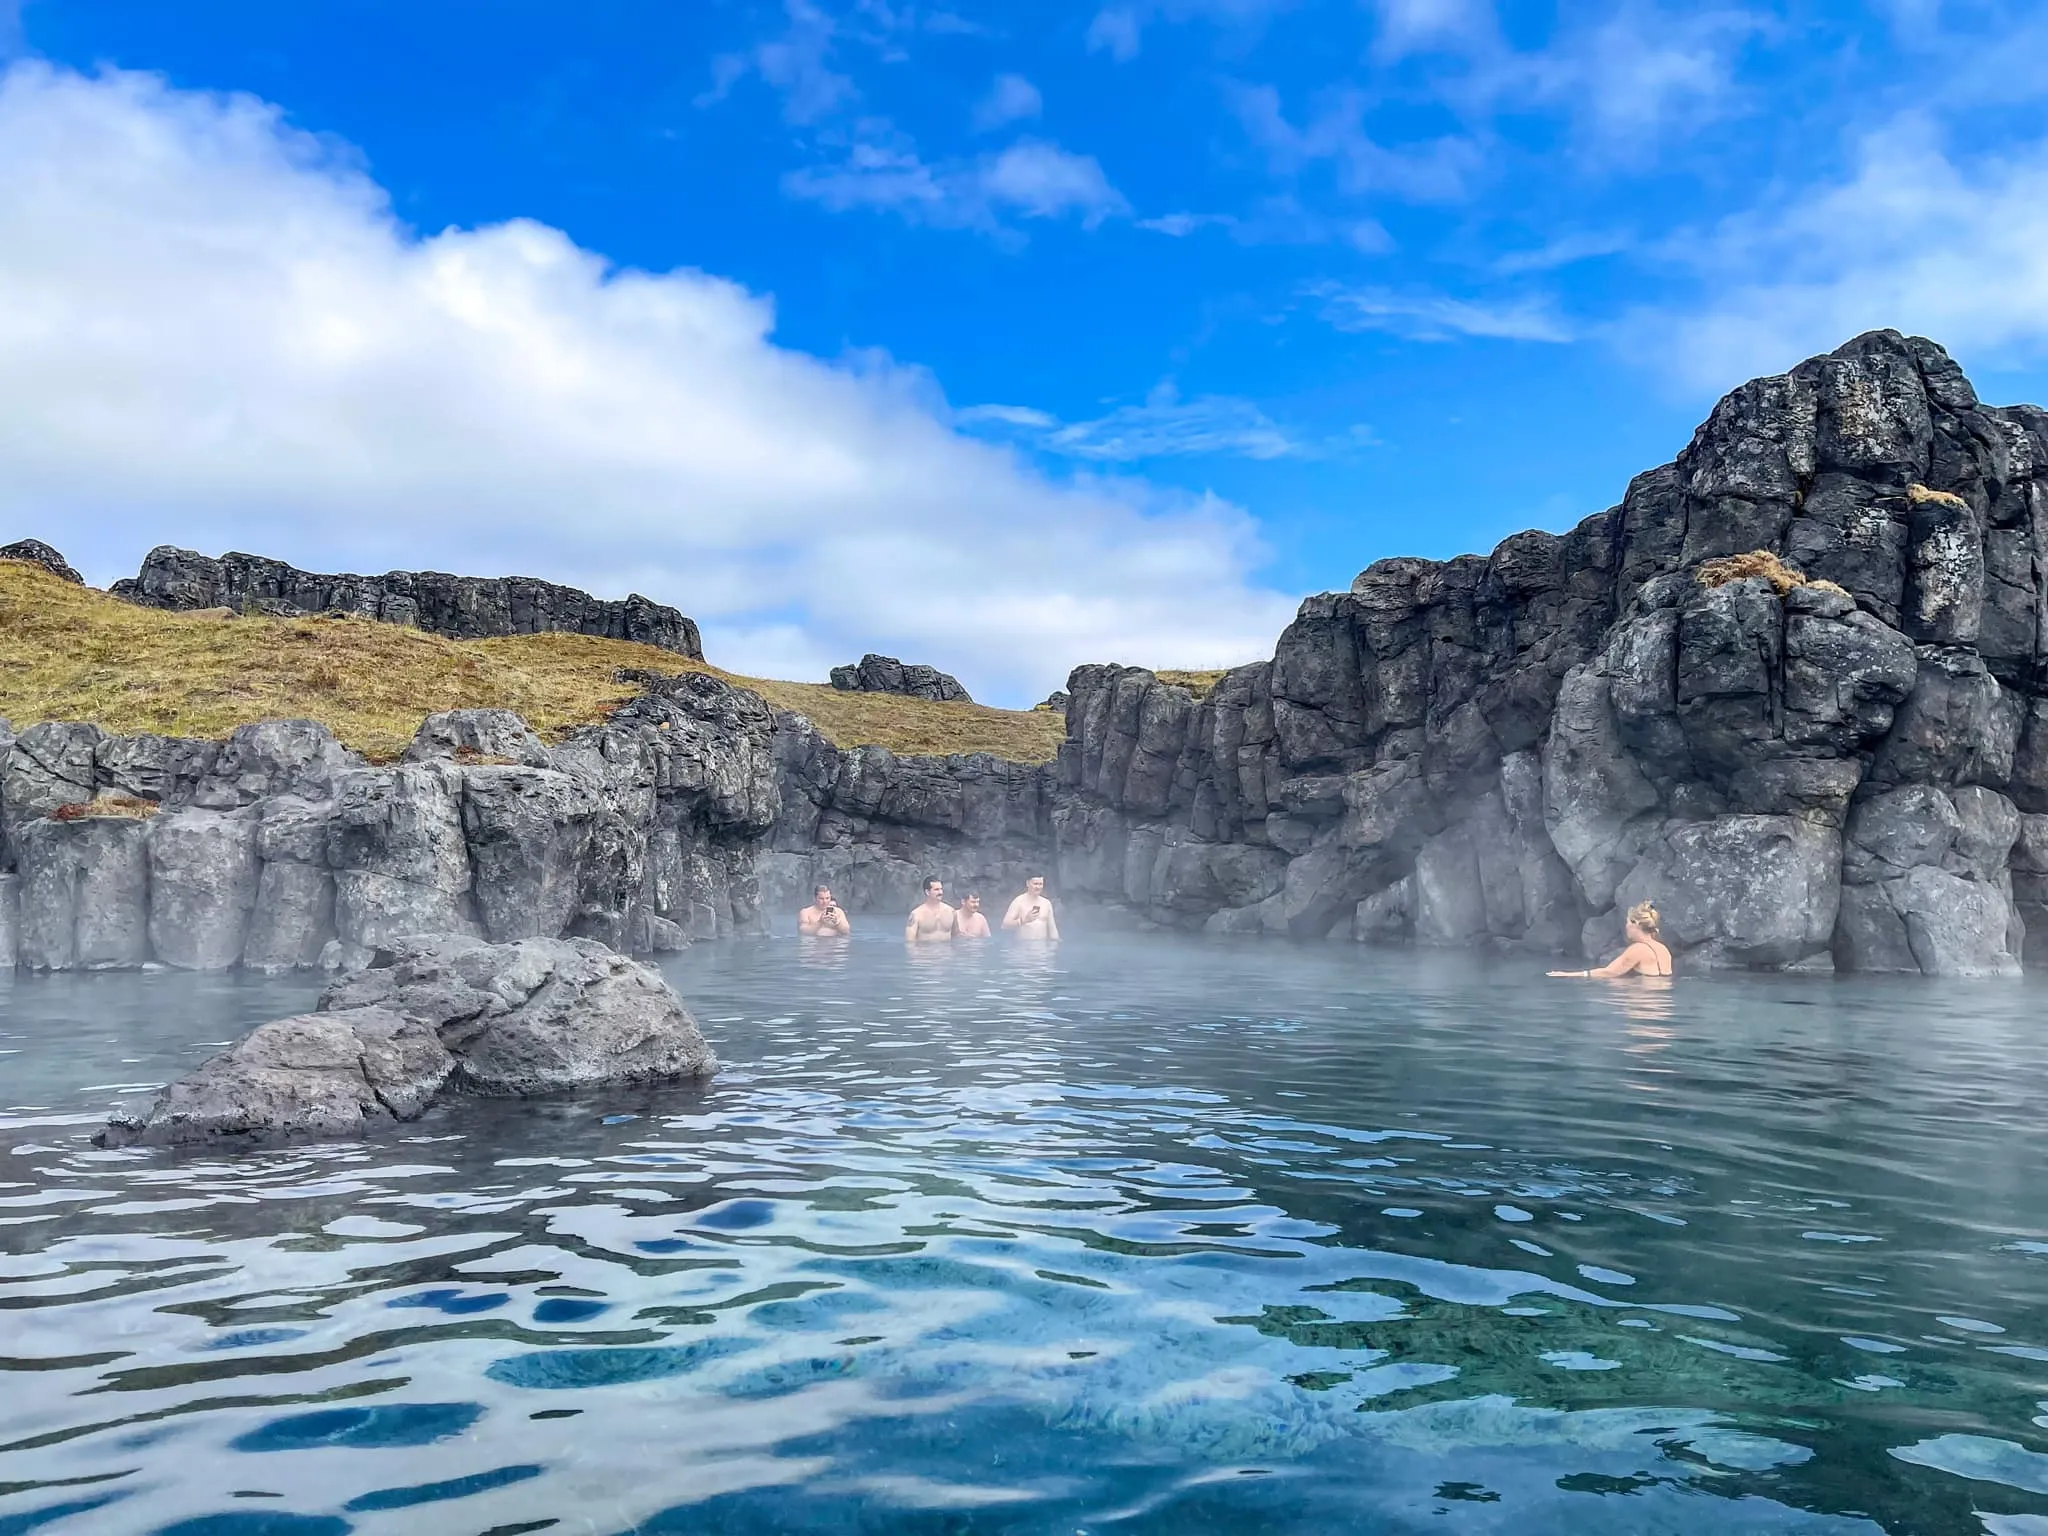 Sky Lagoon in Iceland, Europe | Hot Springs & Pools - Rated 4.2